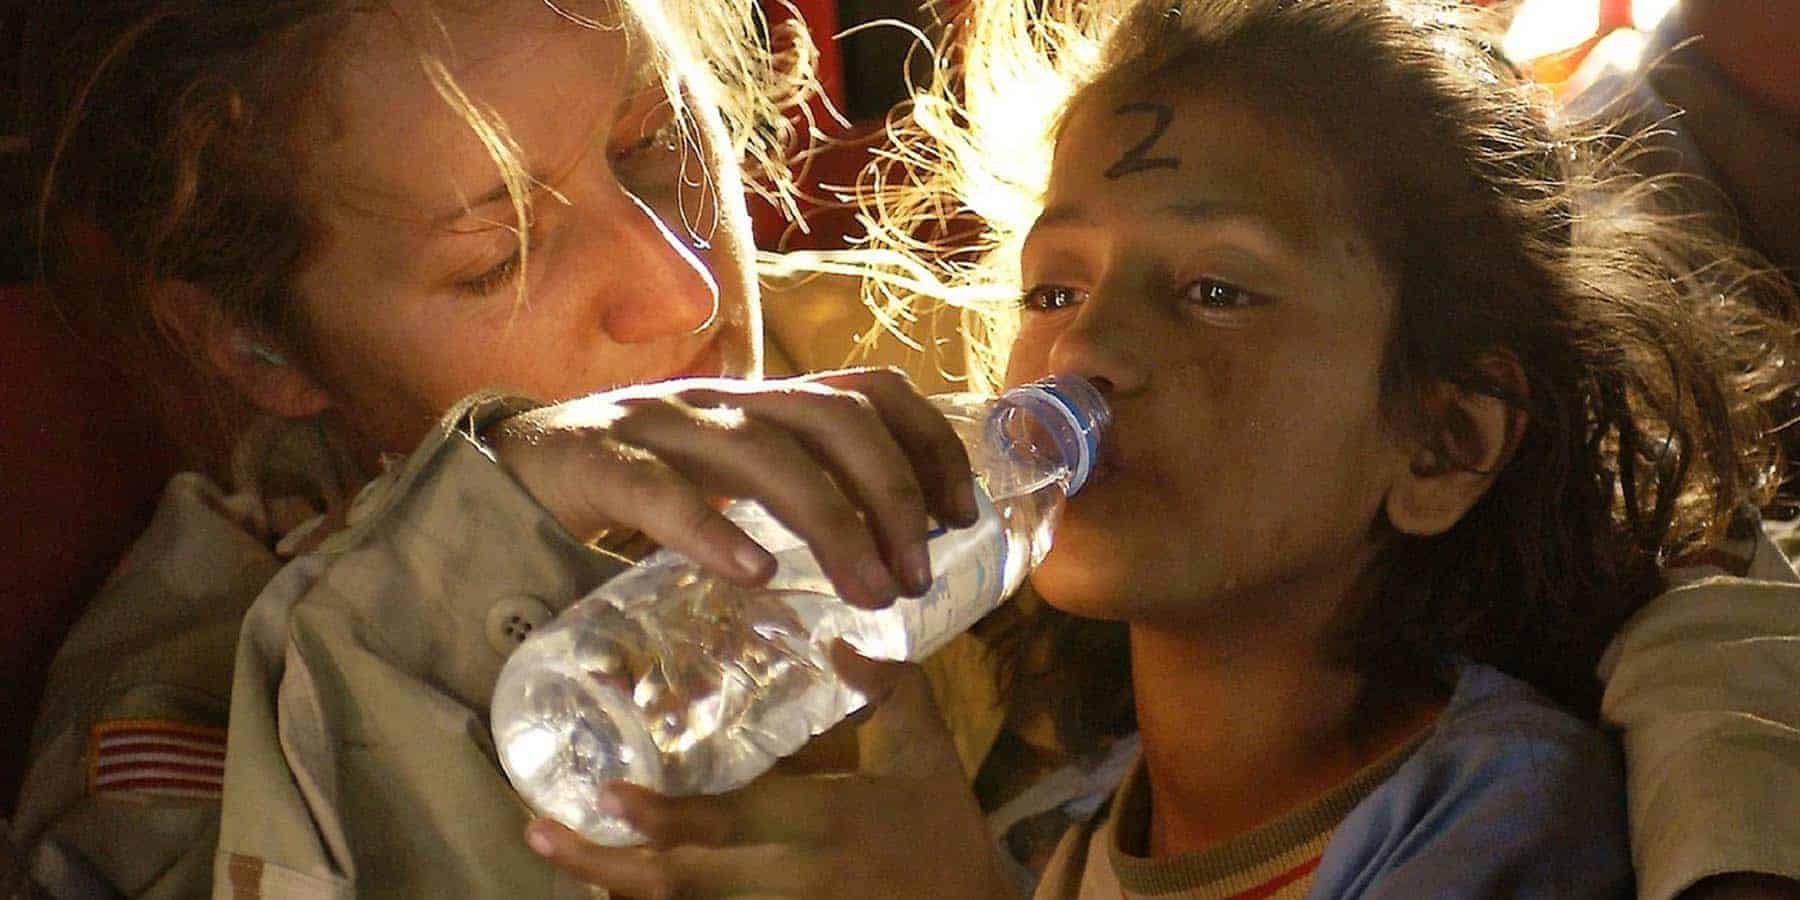 young refugee girl receiving water at a refugee camp